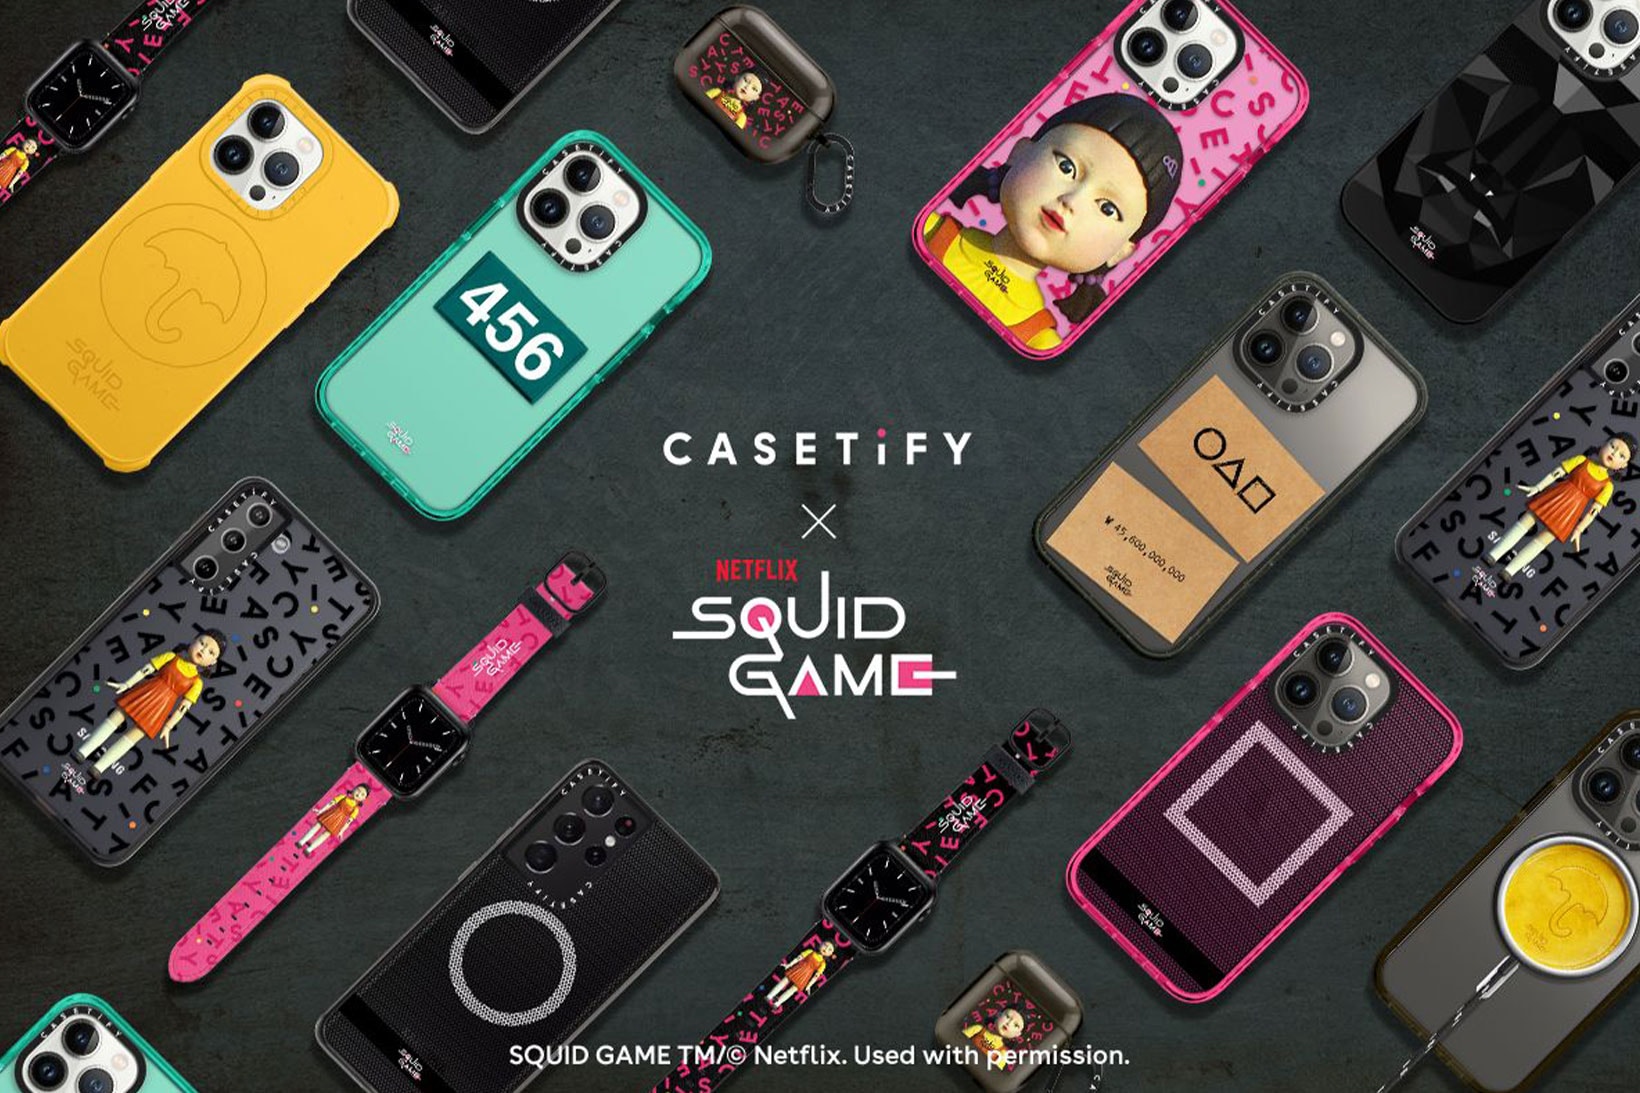 Netflix Squid Game Casetify Collection Collaboration